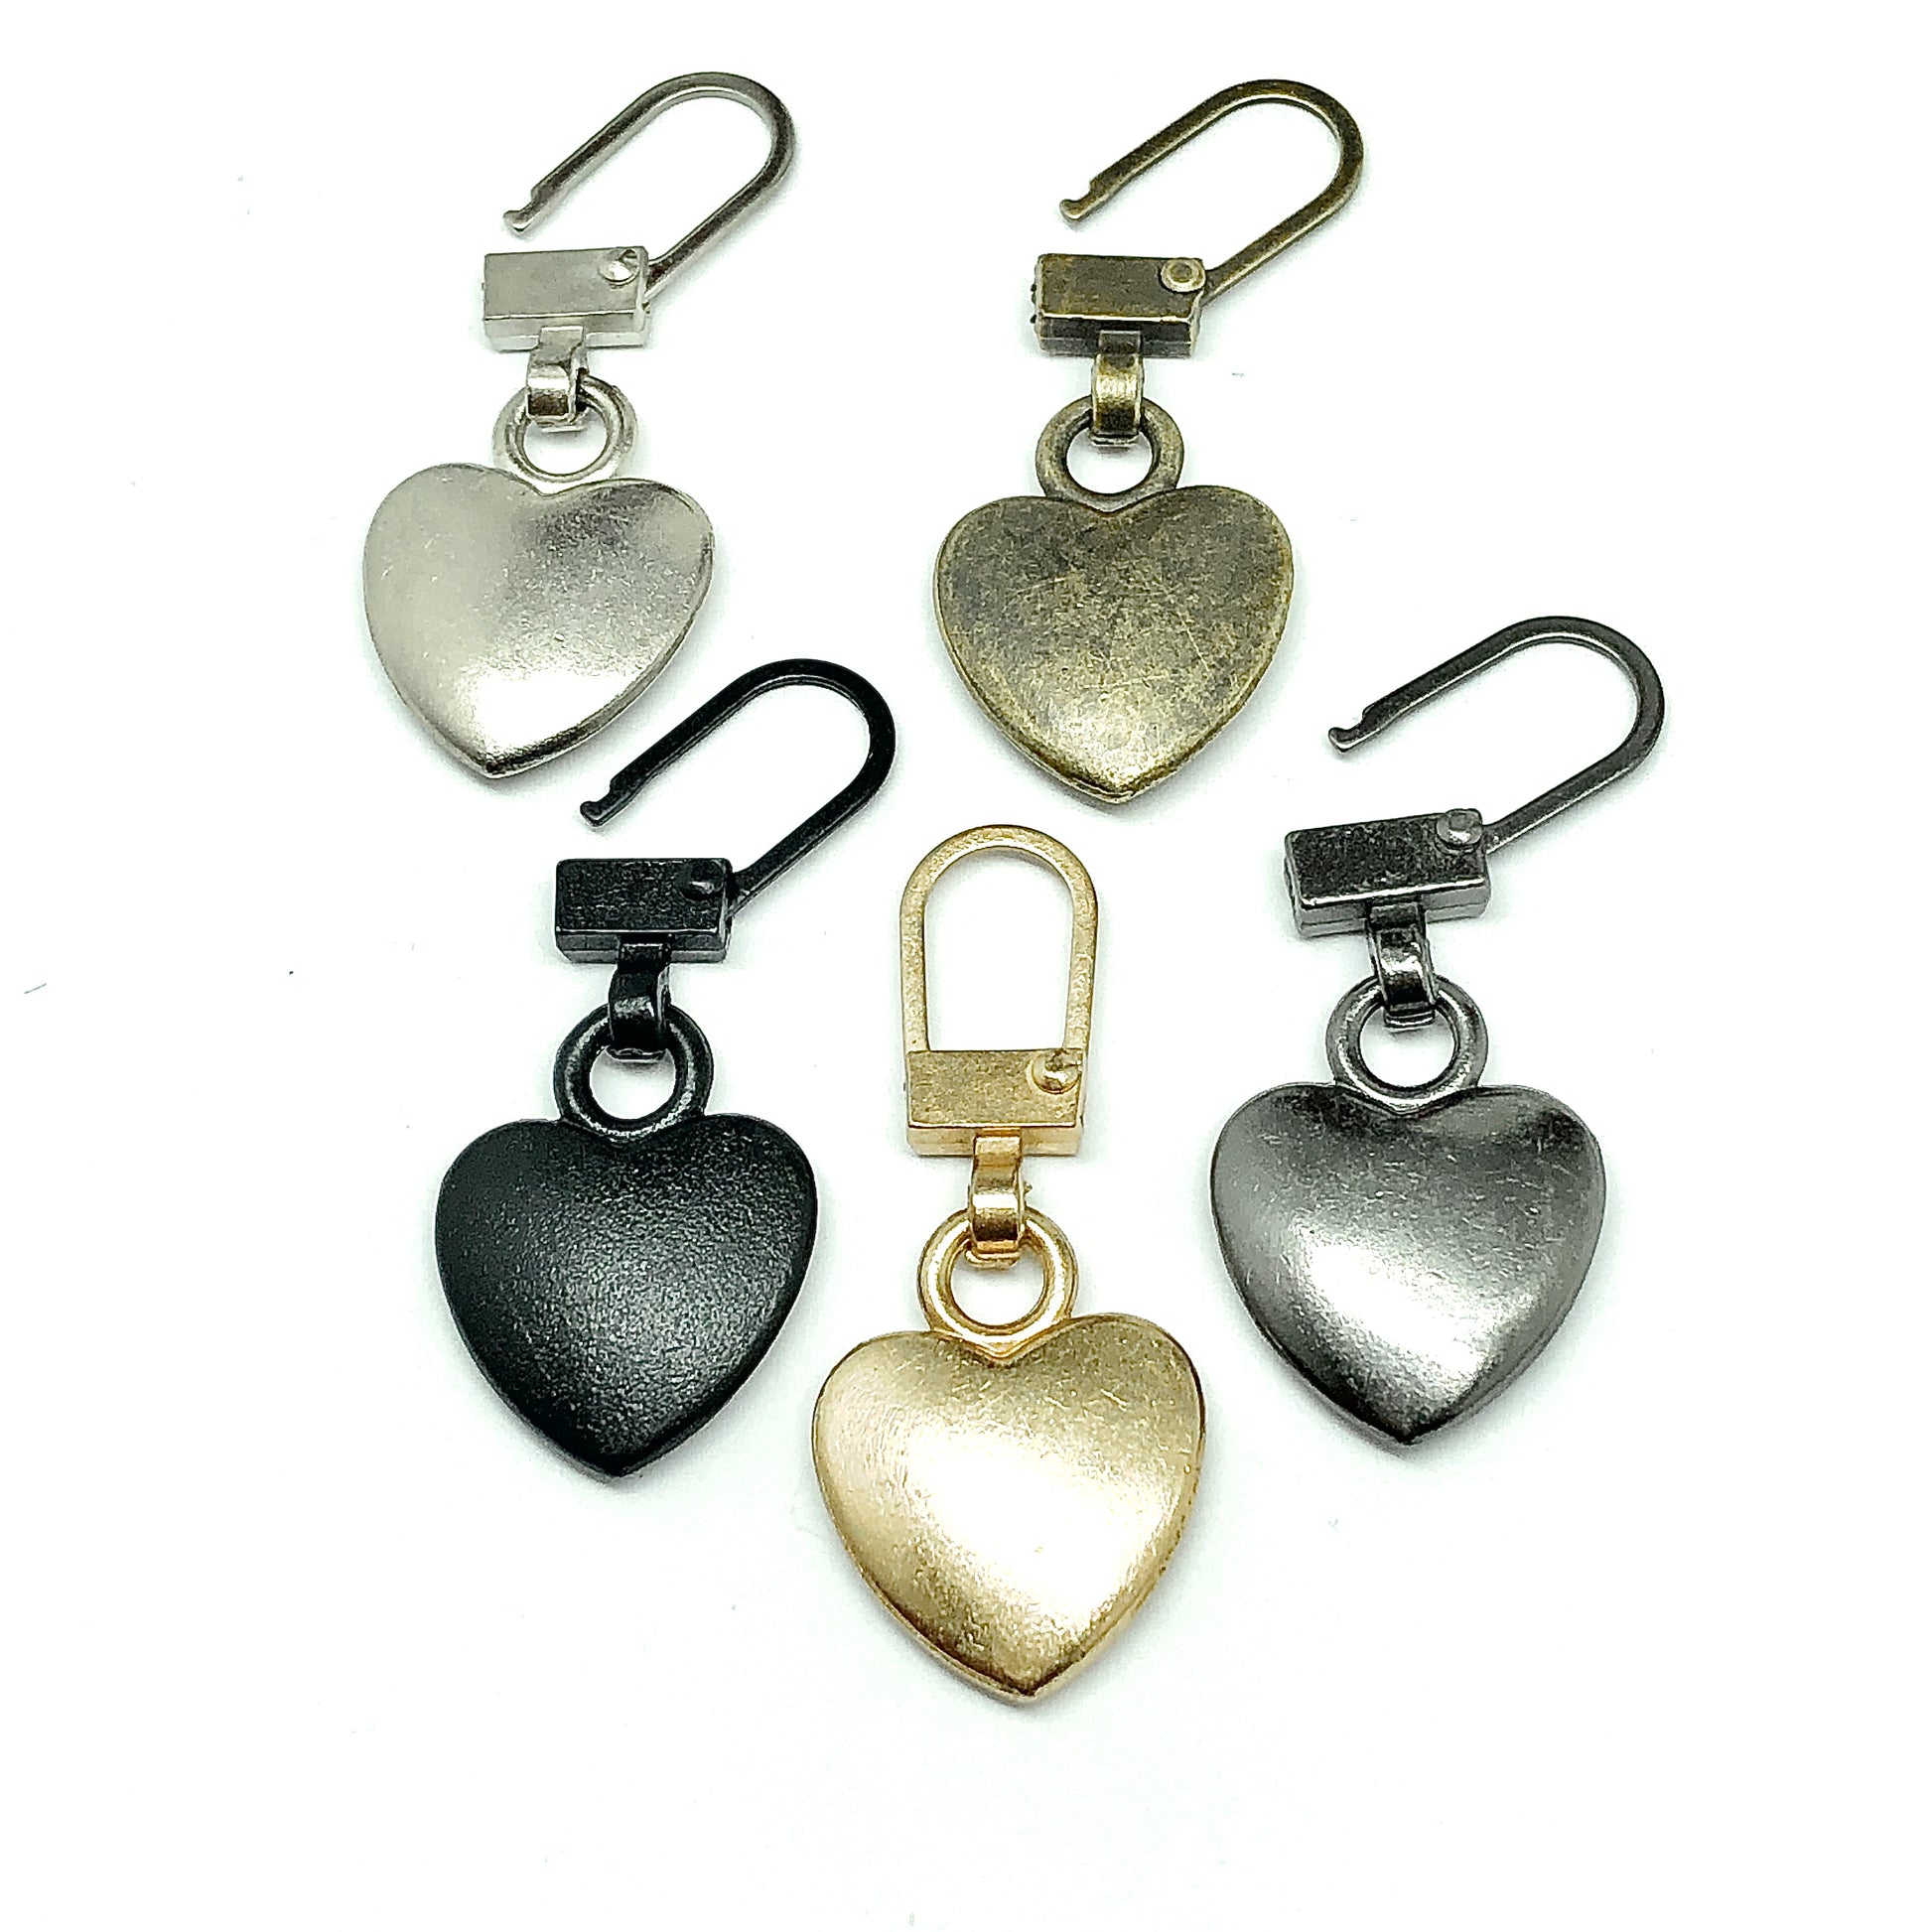 Zipper Repair Charms, Zipper Pull Heart Charm Rustic Graphite - for Repair  or Decorate Shoes, Purses, Keychains + More